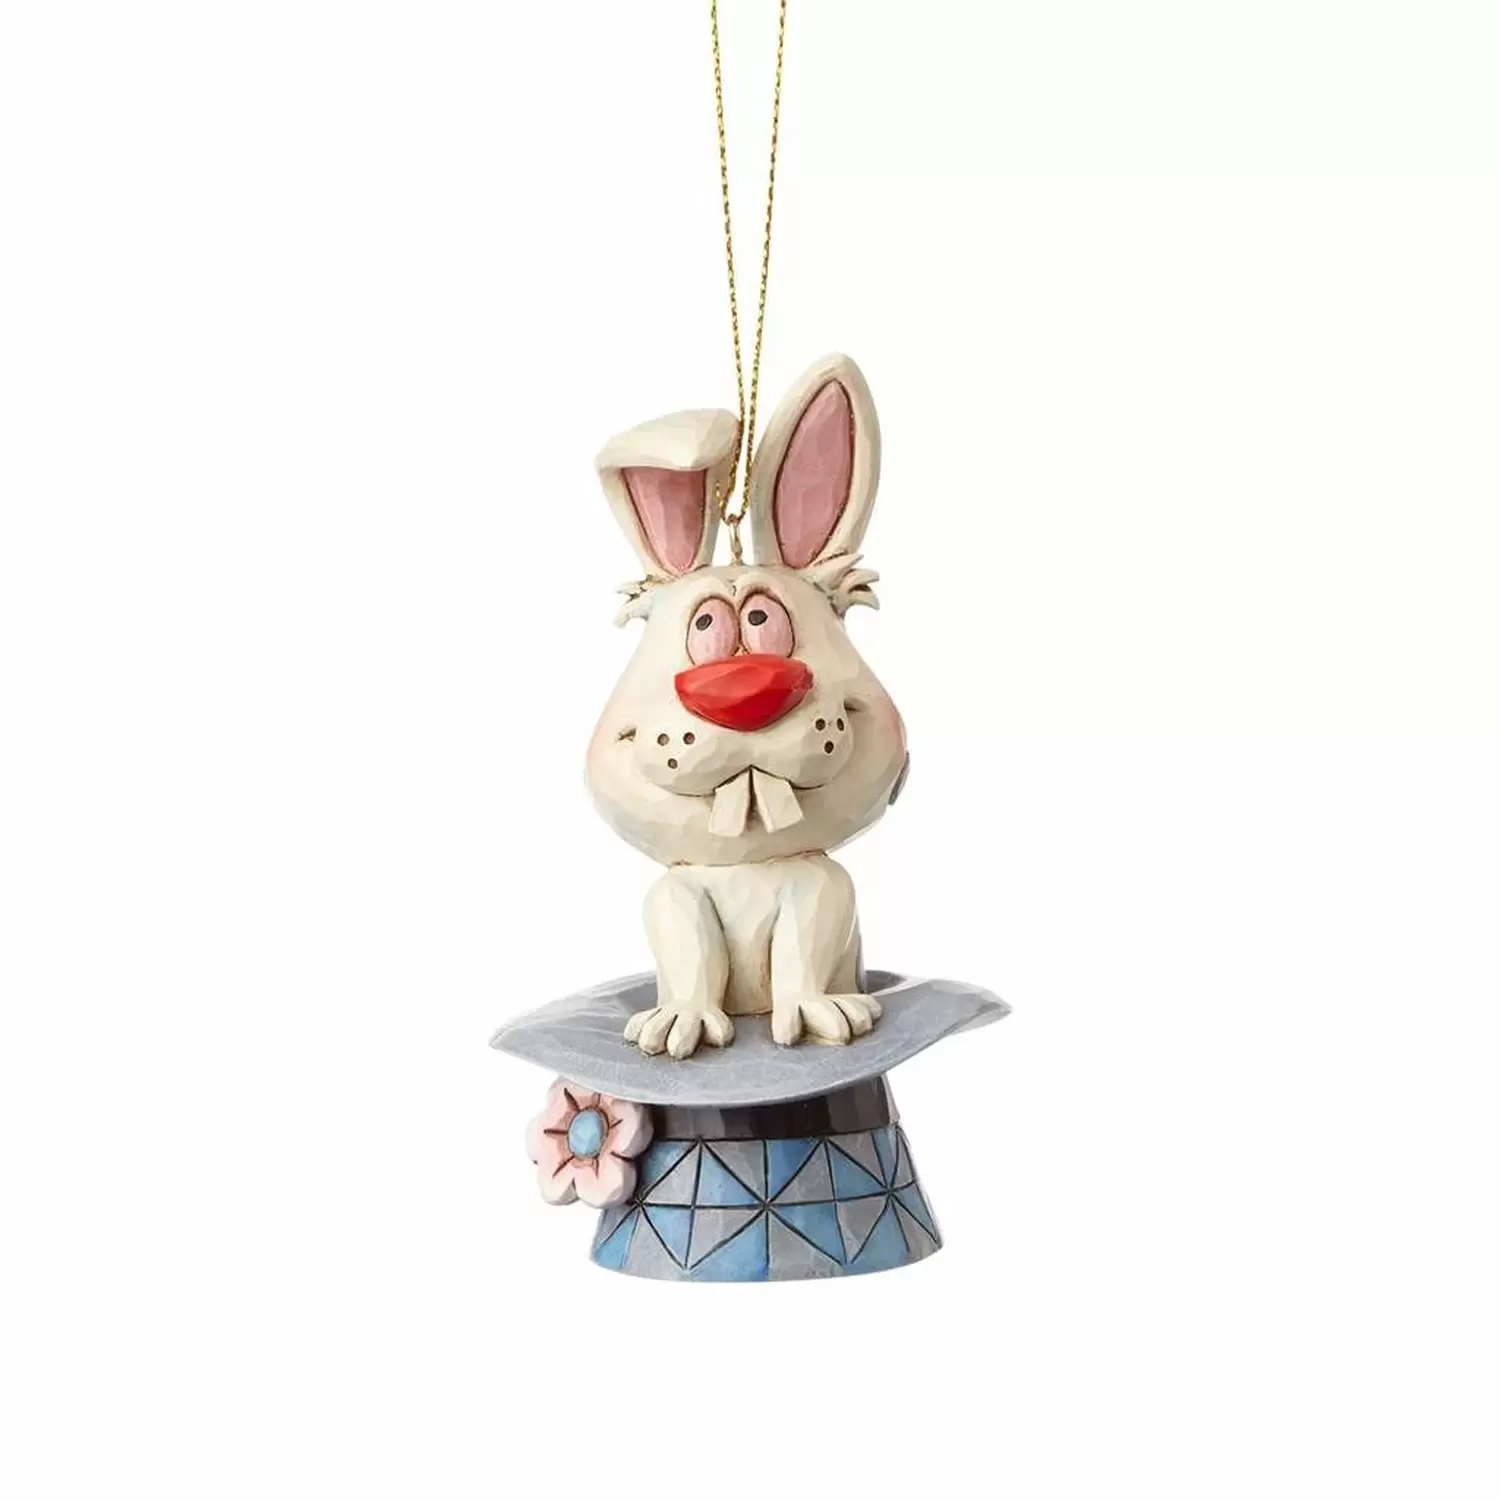 Cartoons Characters by Jim Shore - Hocus Pocus with Magic Hat Hanging Ornament